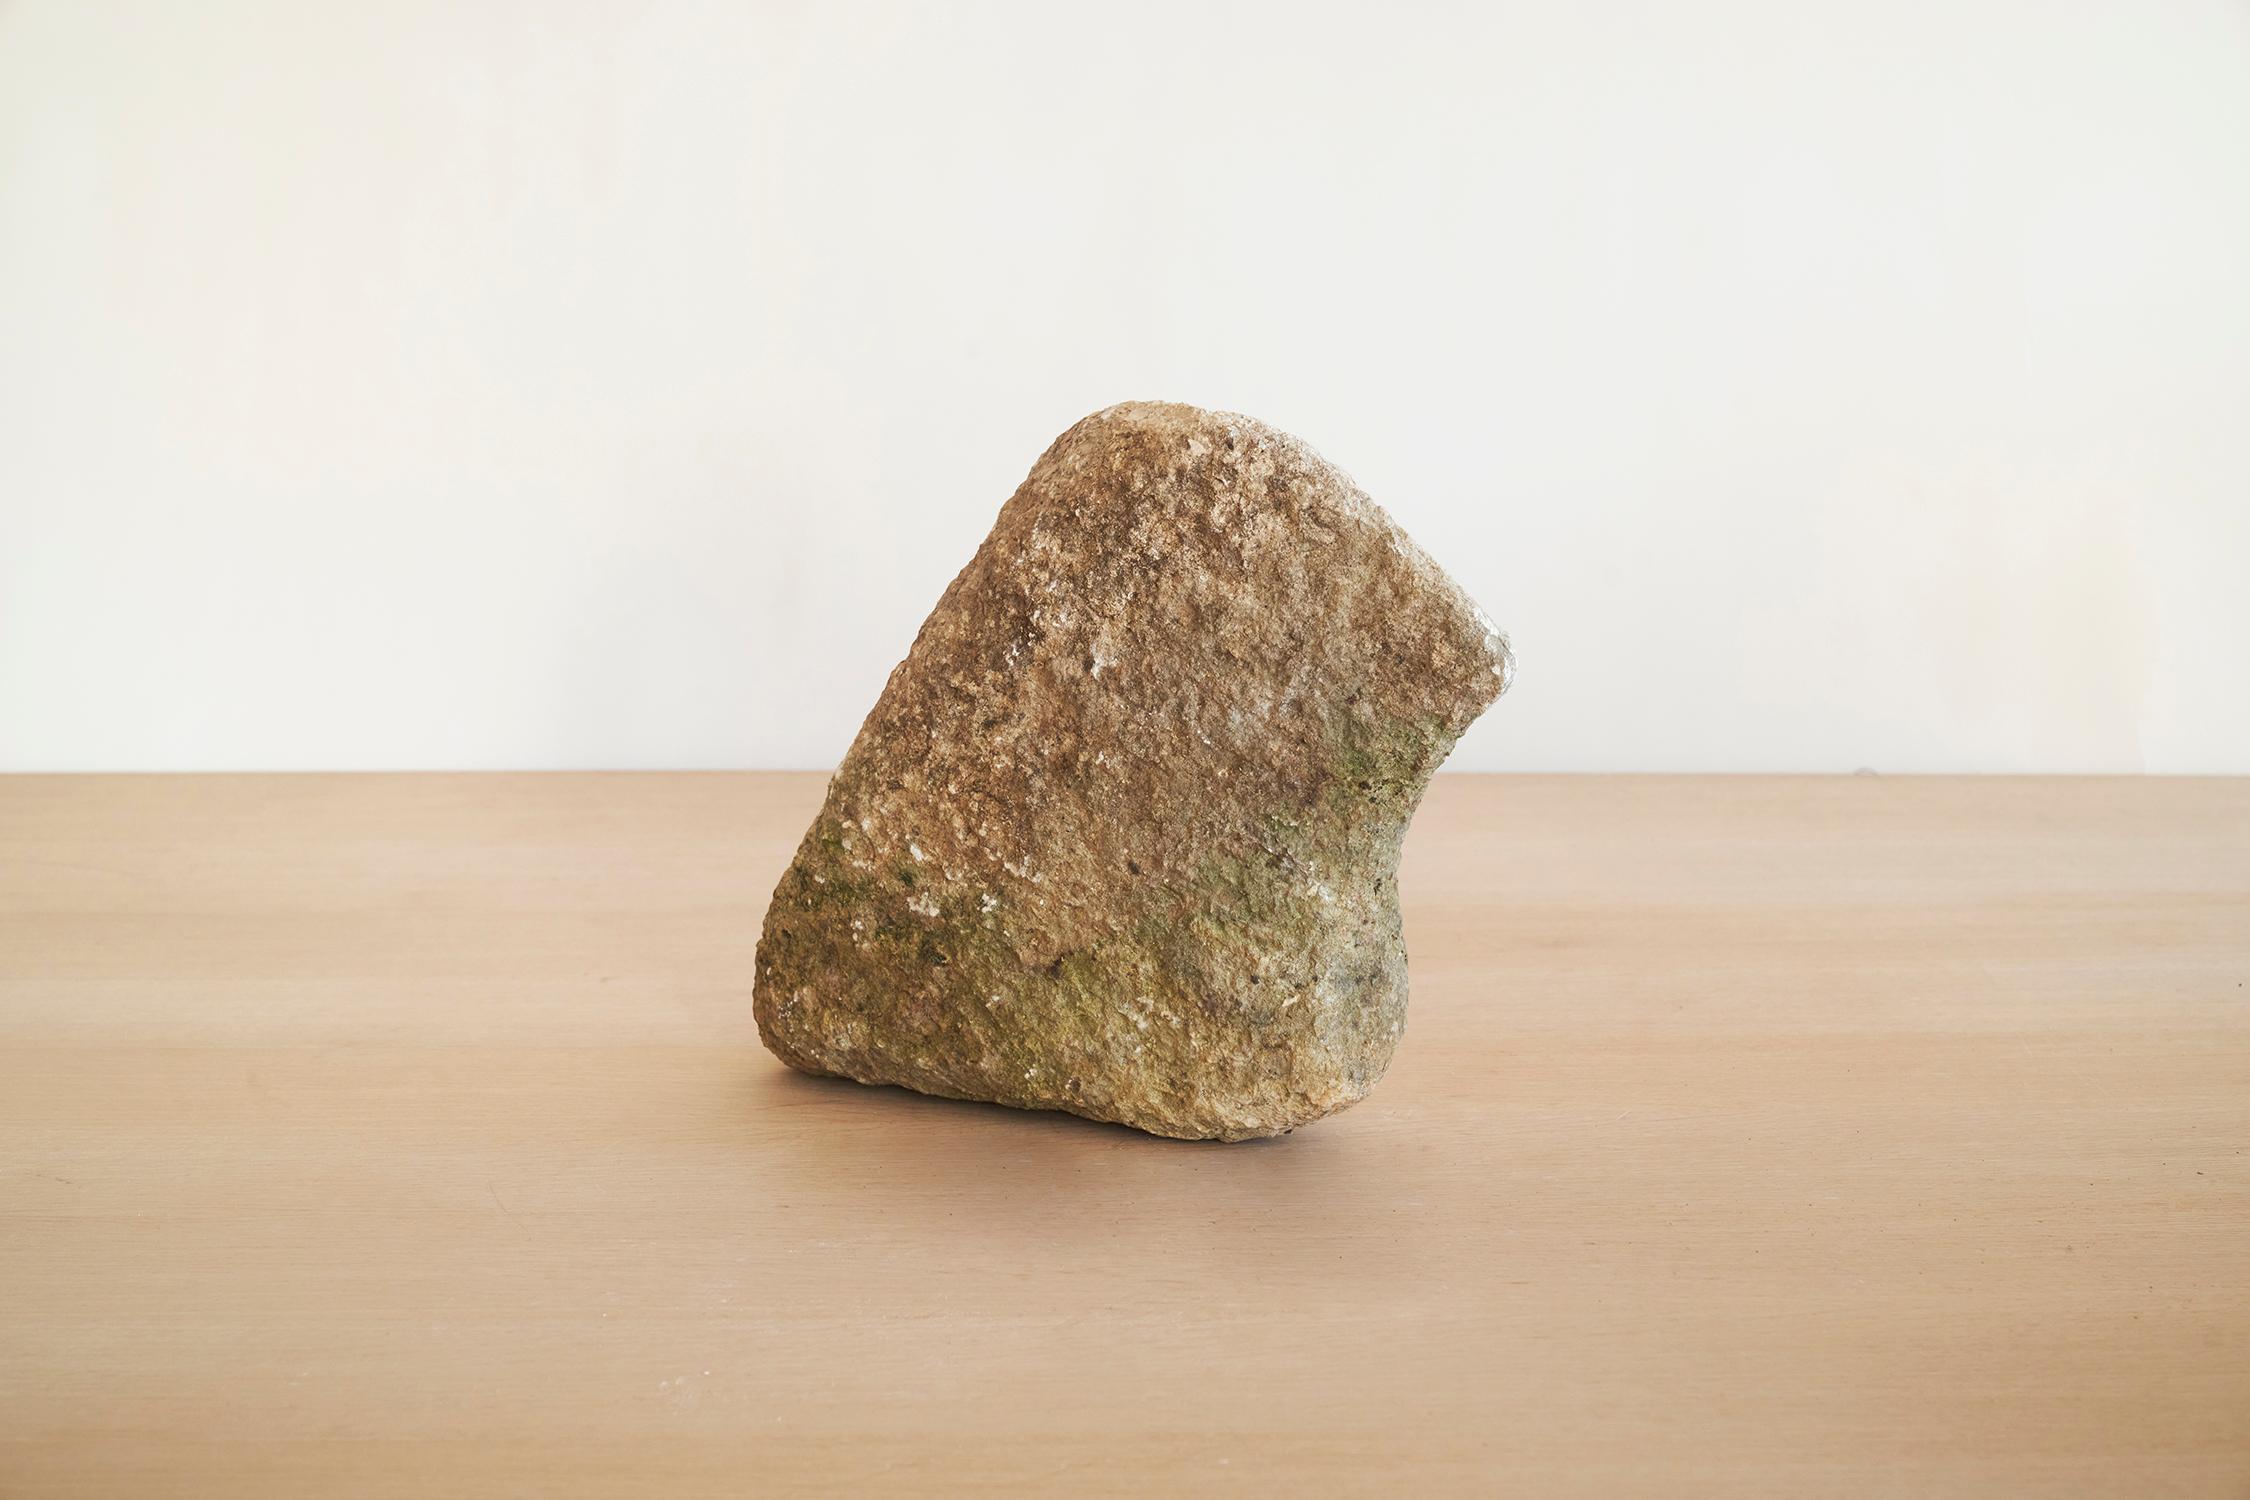 Unique hand-carved stone sculpture by Jean-Baptiste Van den Heede
Unique piece
Dimensions: D 8 x W 30 x H 28 cm
Materials: stone.

Hand-carved stone and aged in nature for 15 years.
Series of sculptures carved in 2007 with the idea of ​​leaving them